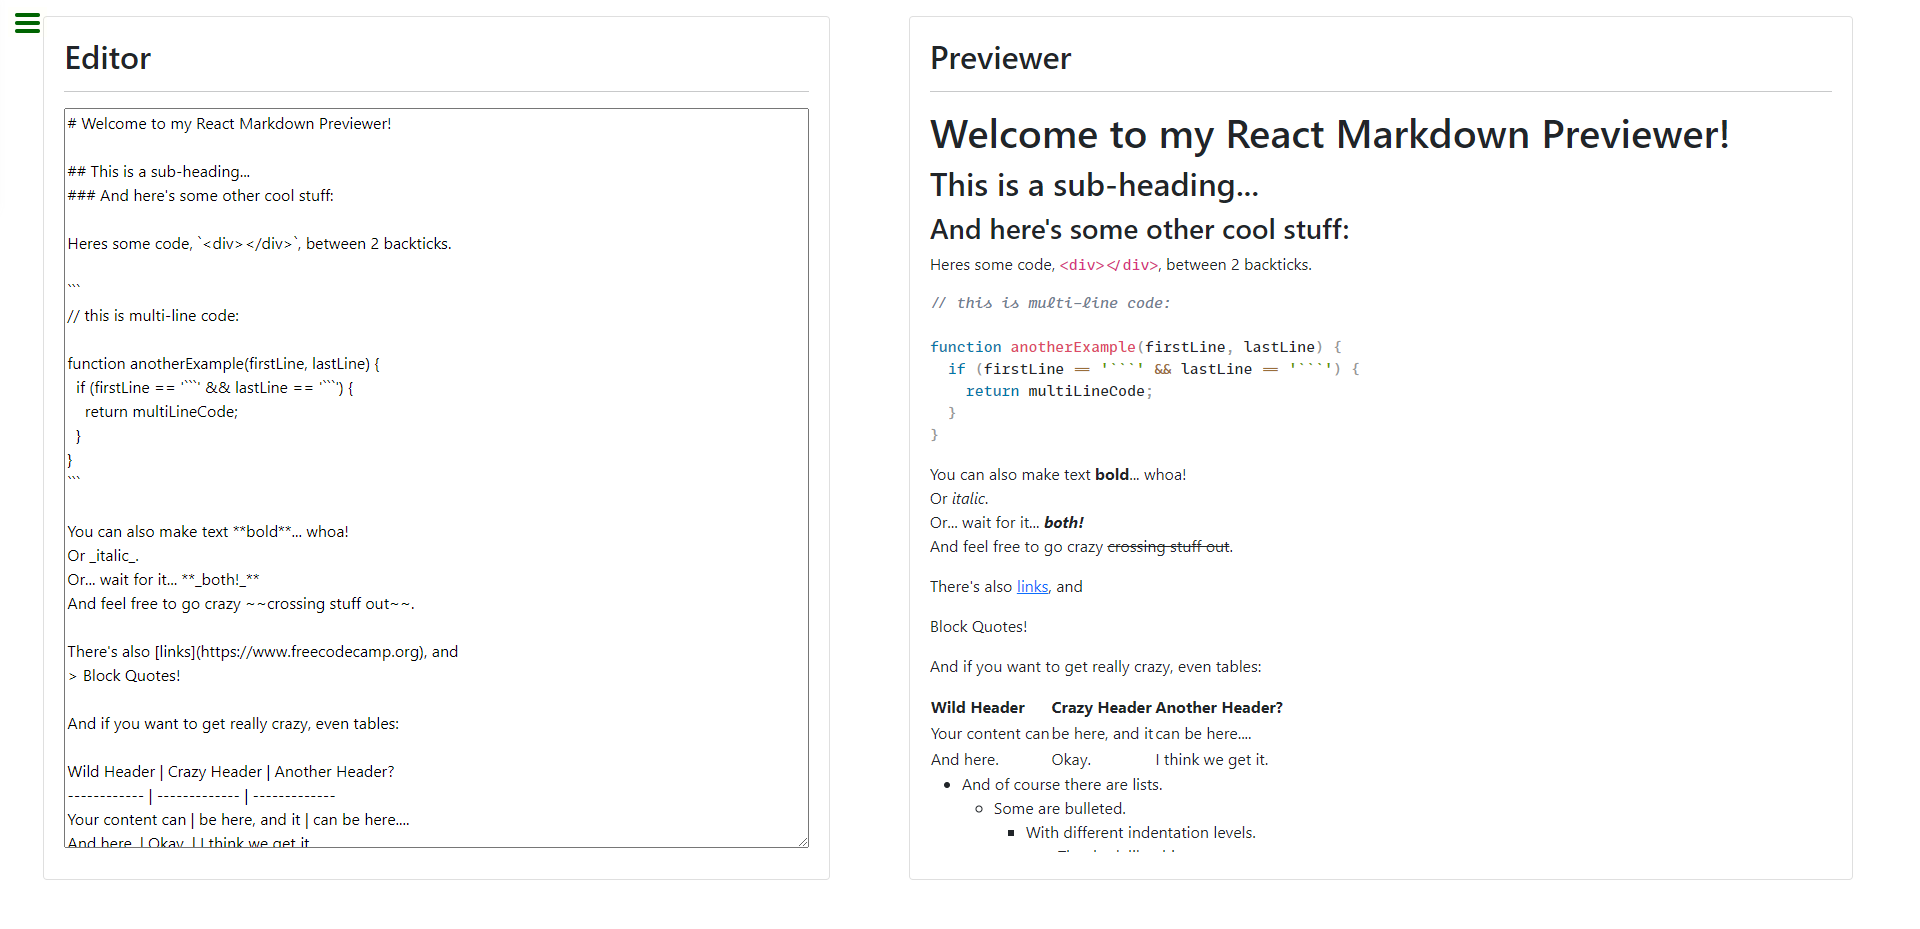 Screenshot of the Markdown Previewer project